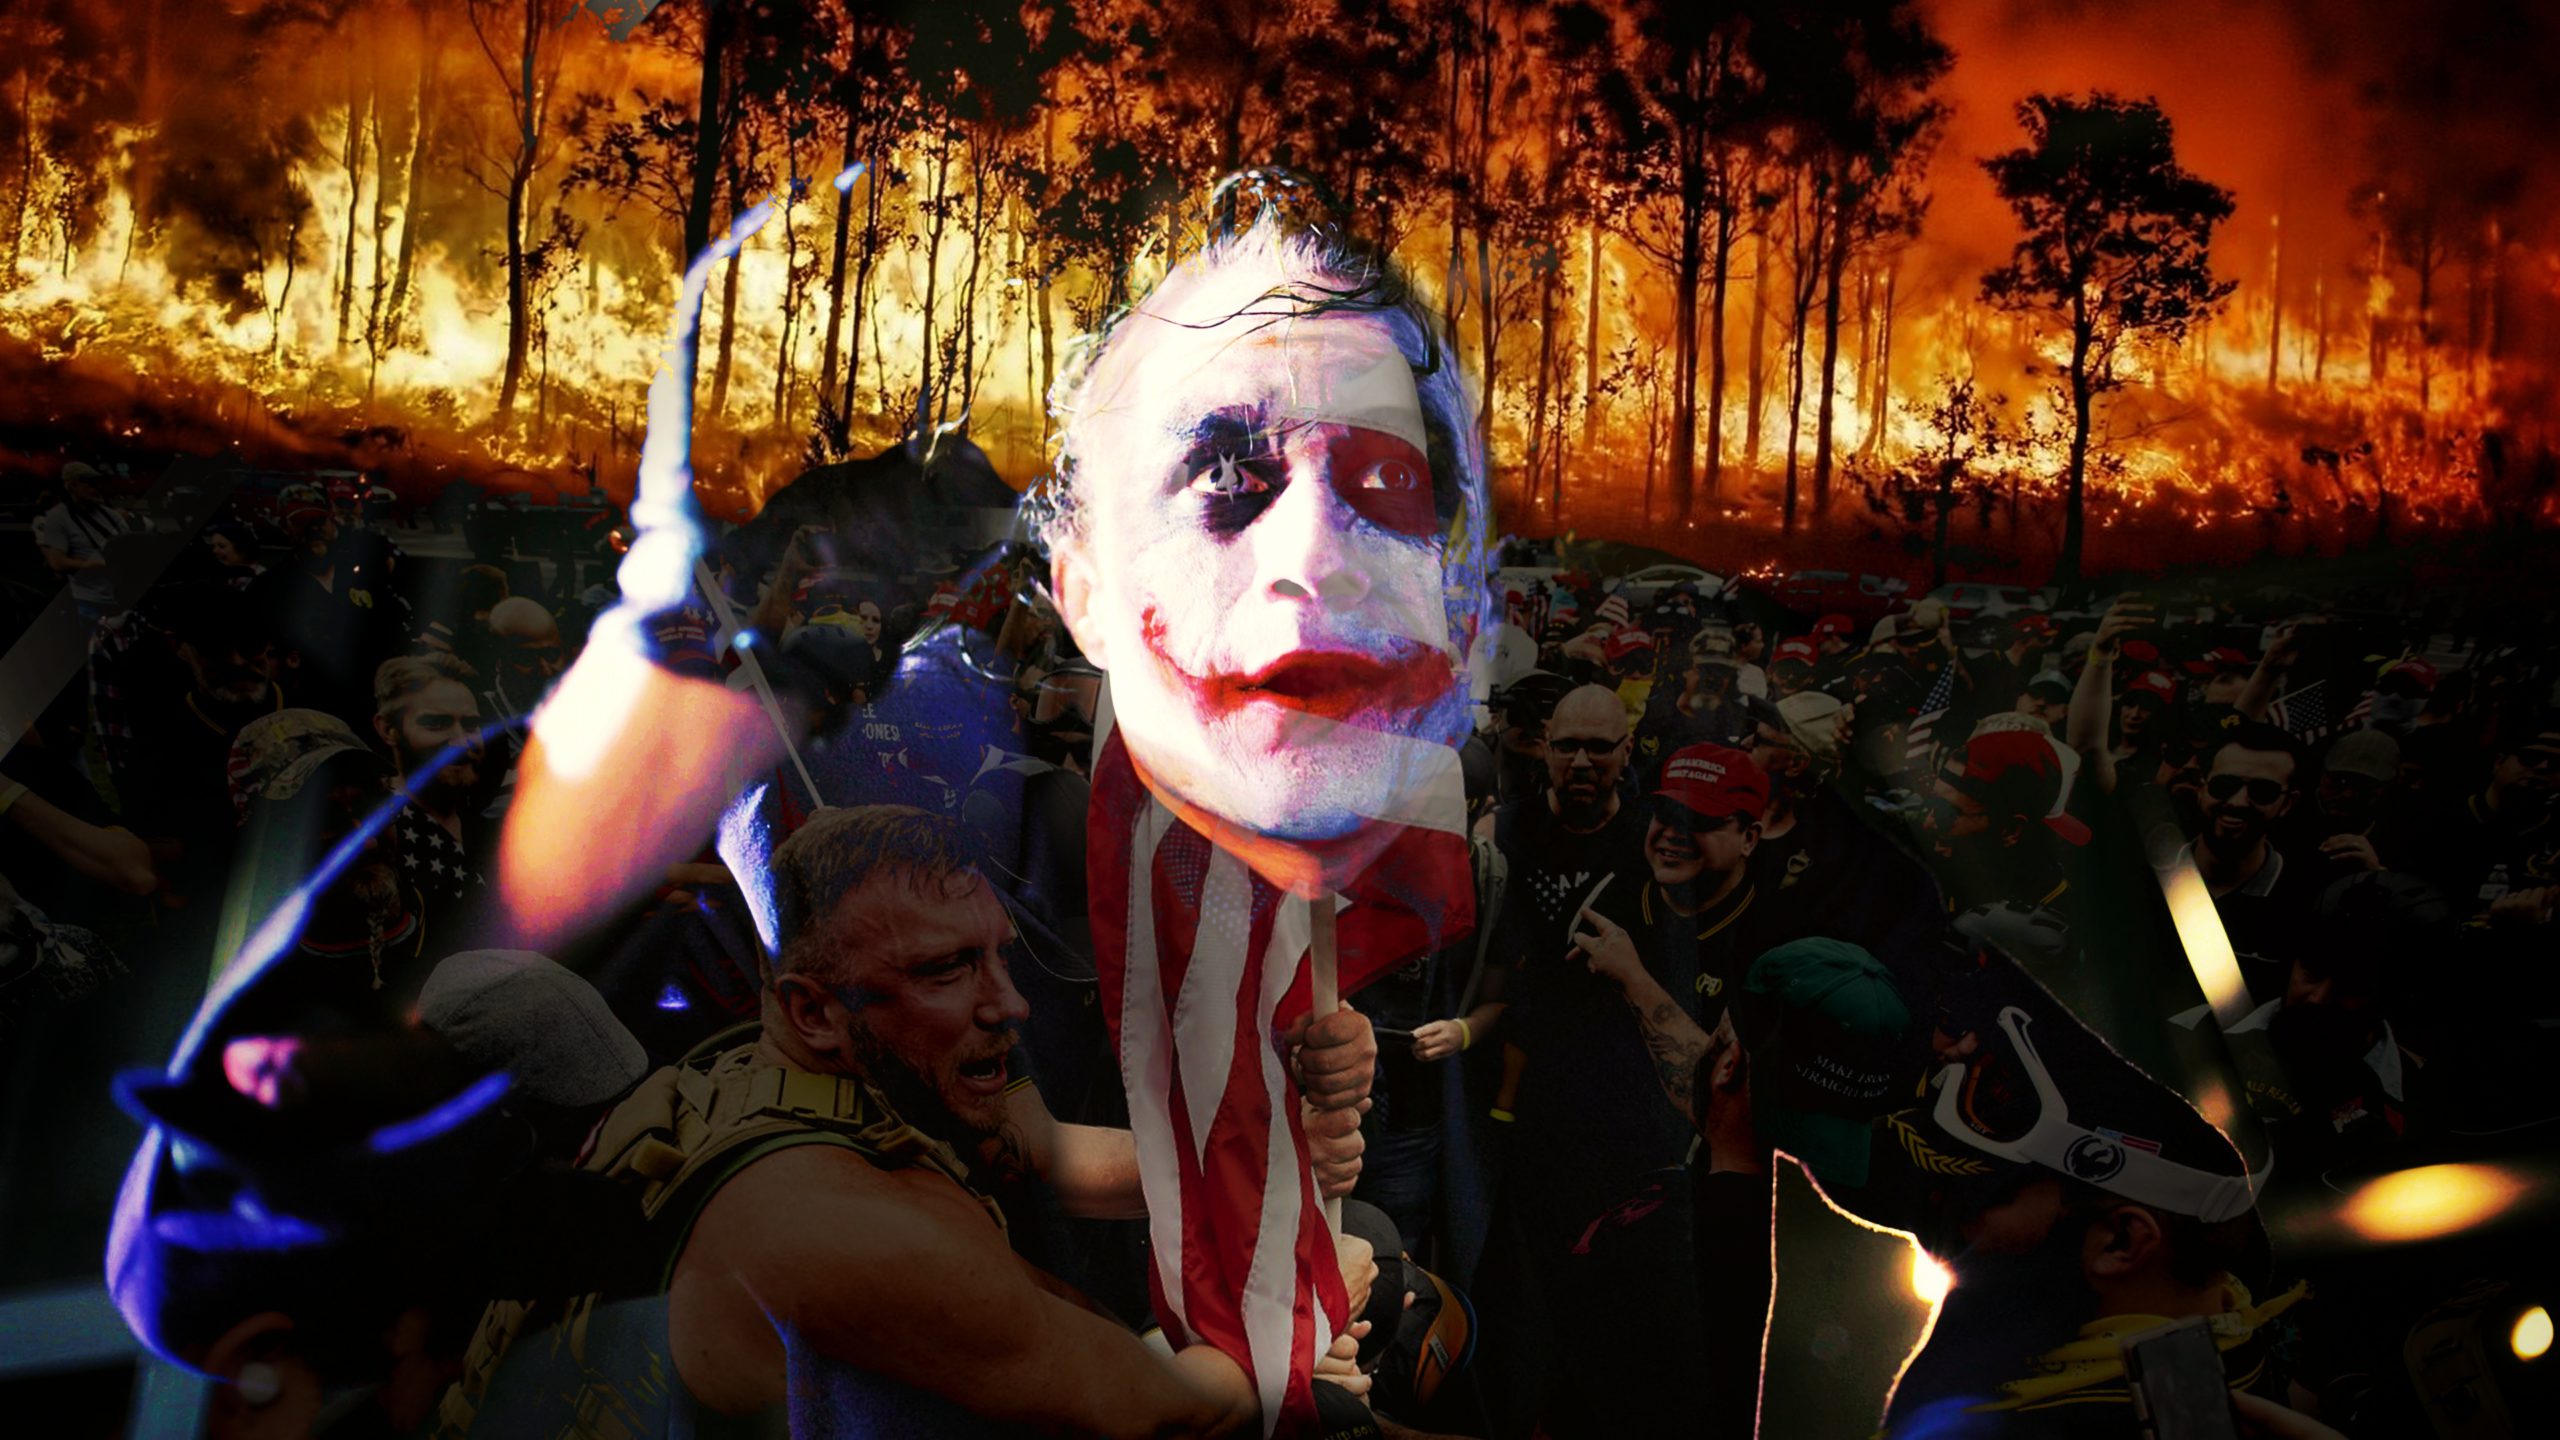 The Joker From Batman overlaid a bunch of proud boys fighting and a forest fire in the background